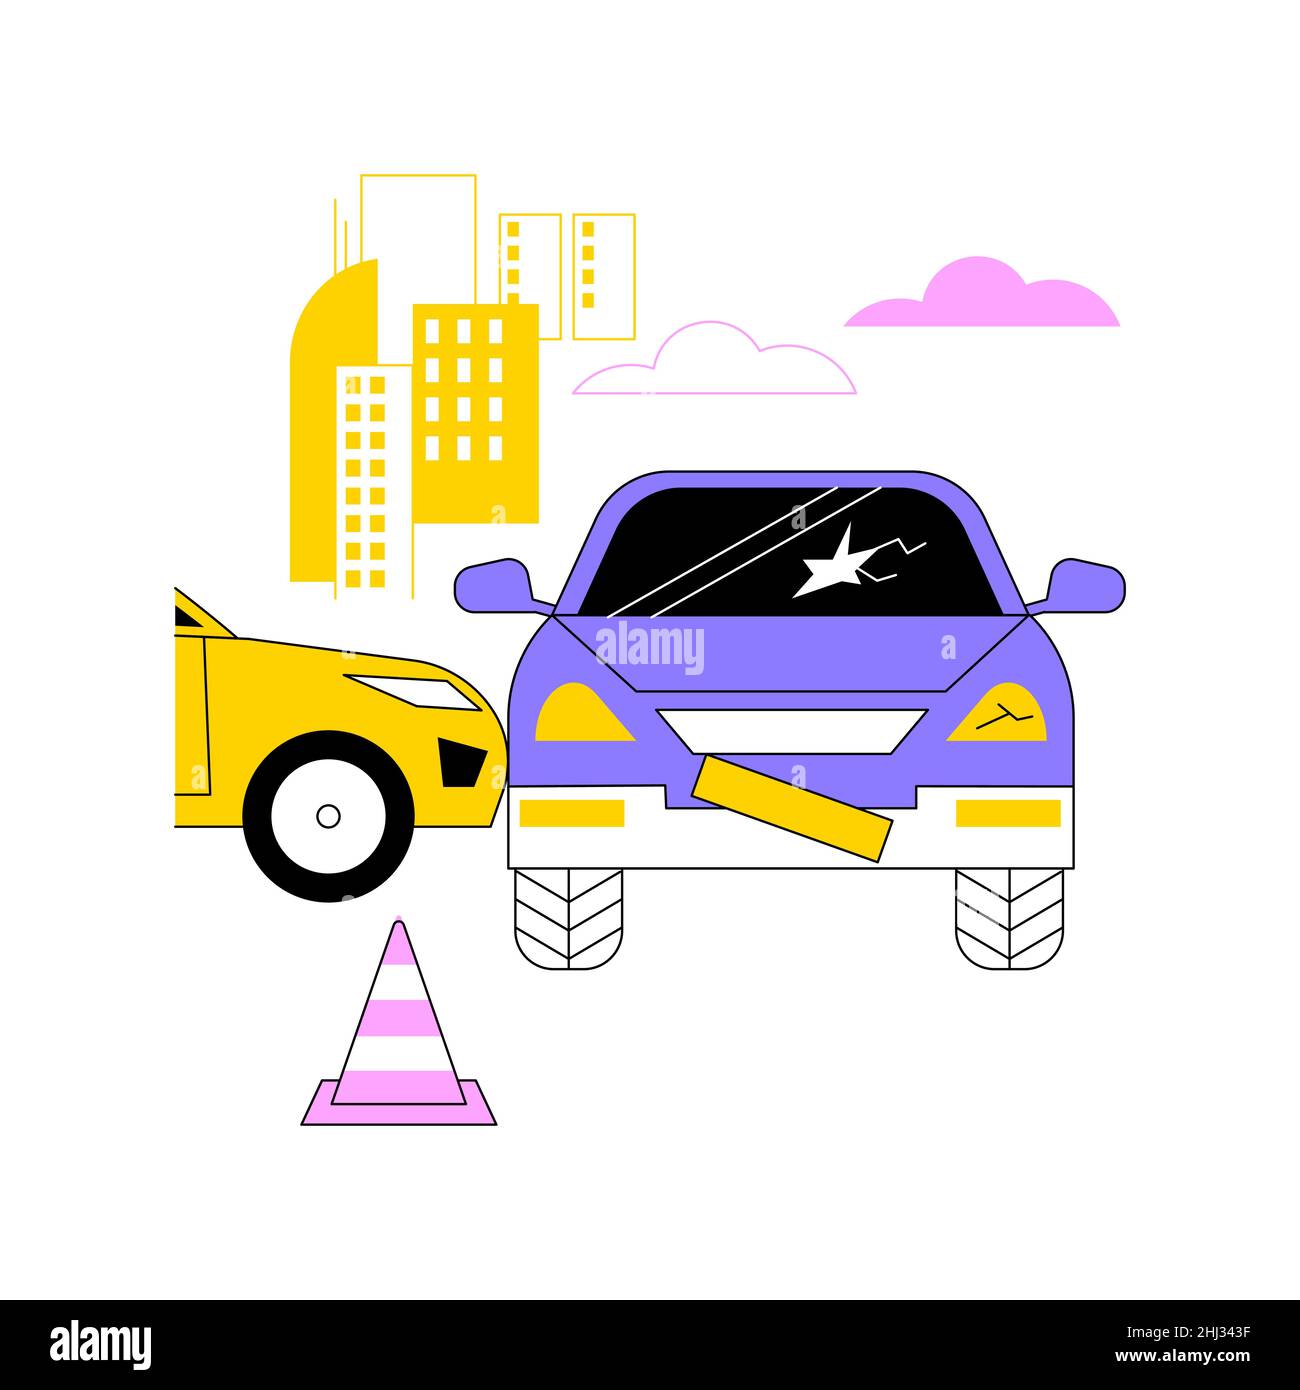 Traffic accident abstract concept vector illustration. Road accident report, traffic laws violation, single car crash investigation, injury statistics, multi-vehicle collision abstract metaphor. Stock Vector